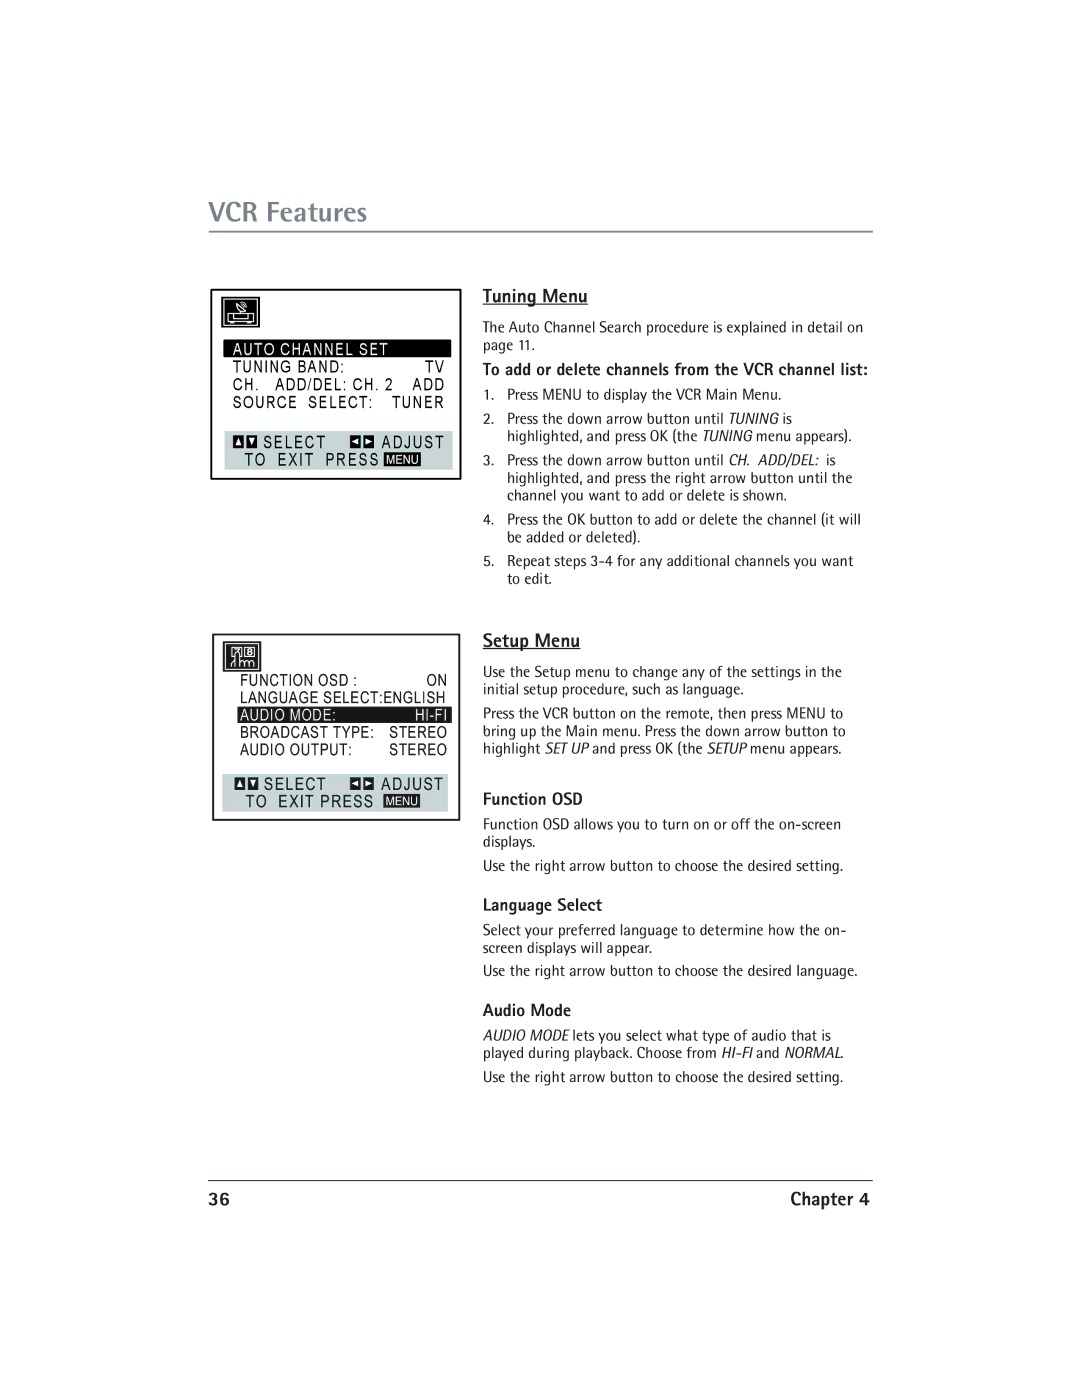 RCA DVD/VCR Tuning Menu, Setup Menu, Function OSD, Audio Mode, Auto Channel Search procedure is explained in detail on 